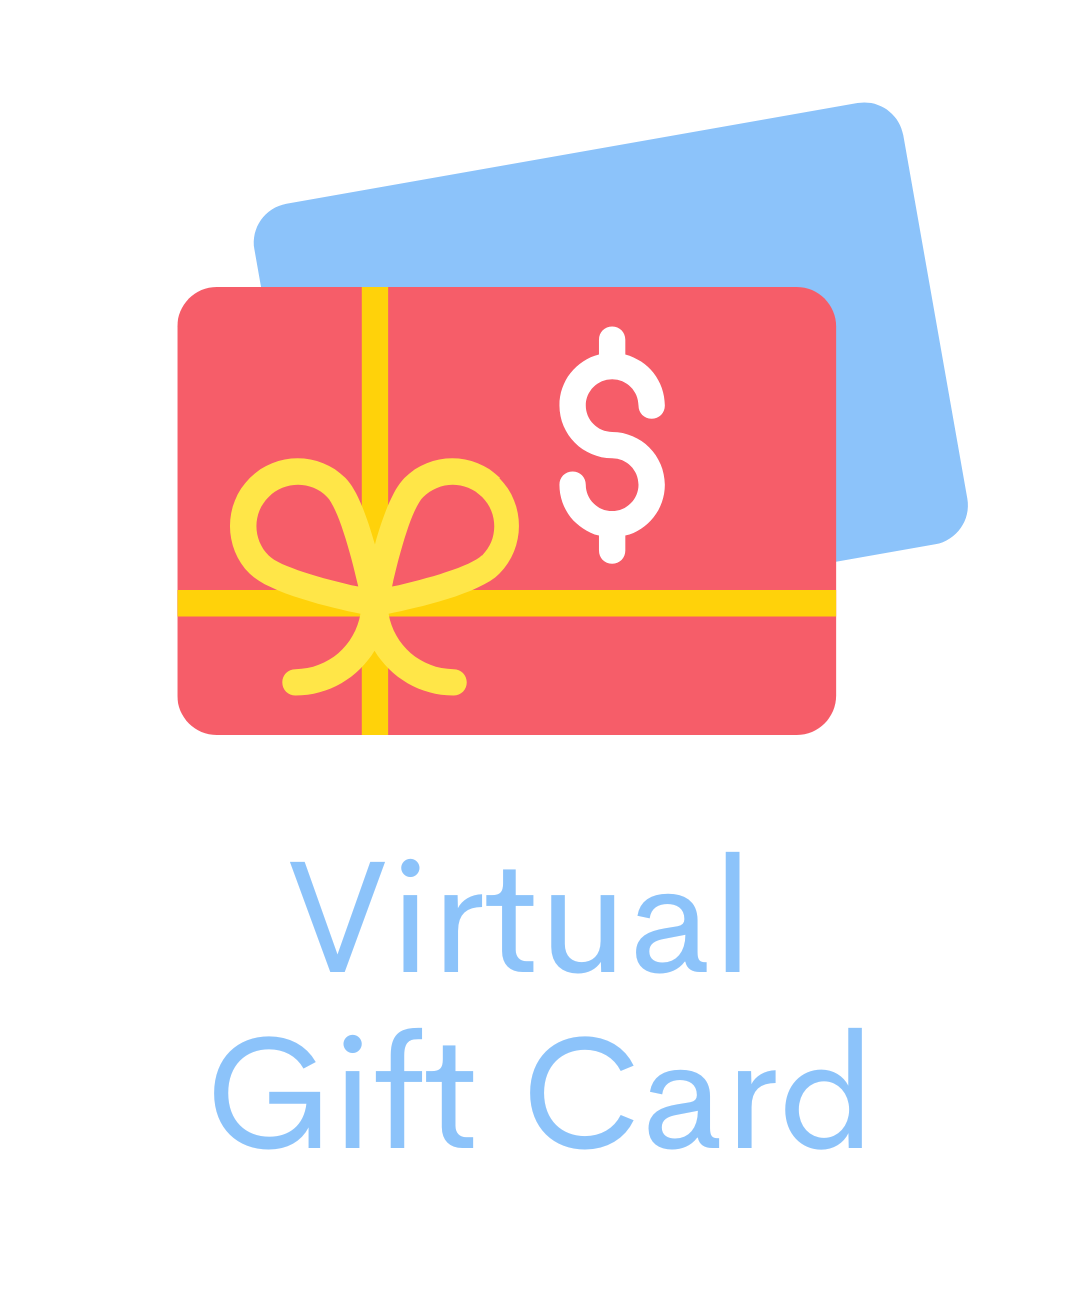 Athlicity Gift Card- the perfect gift for friends and family